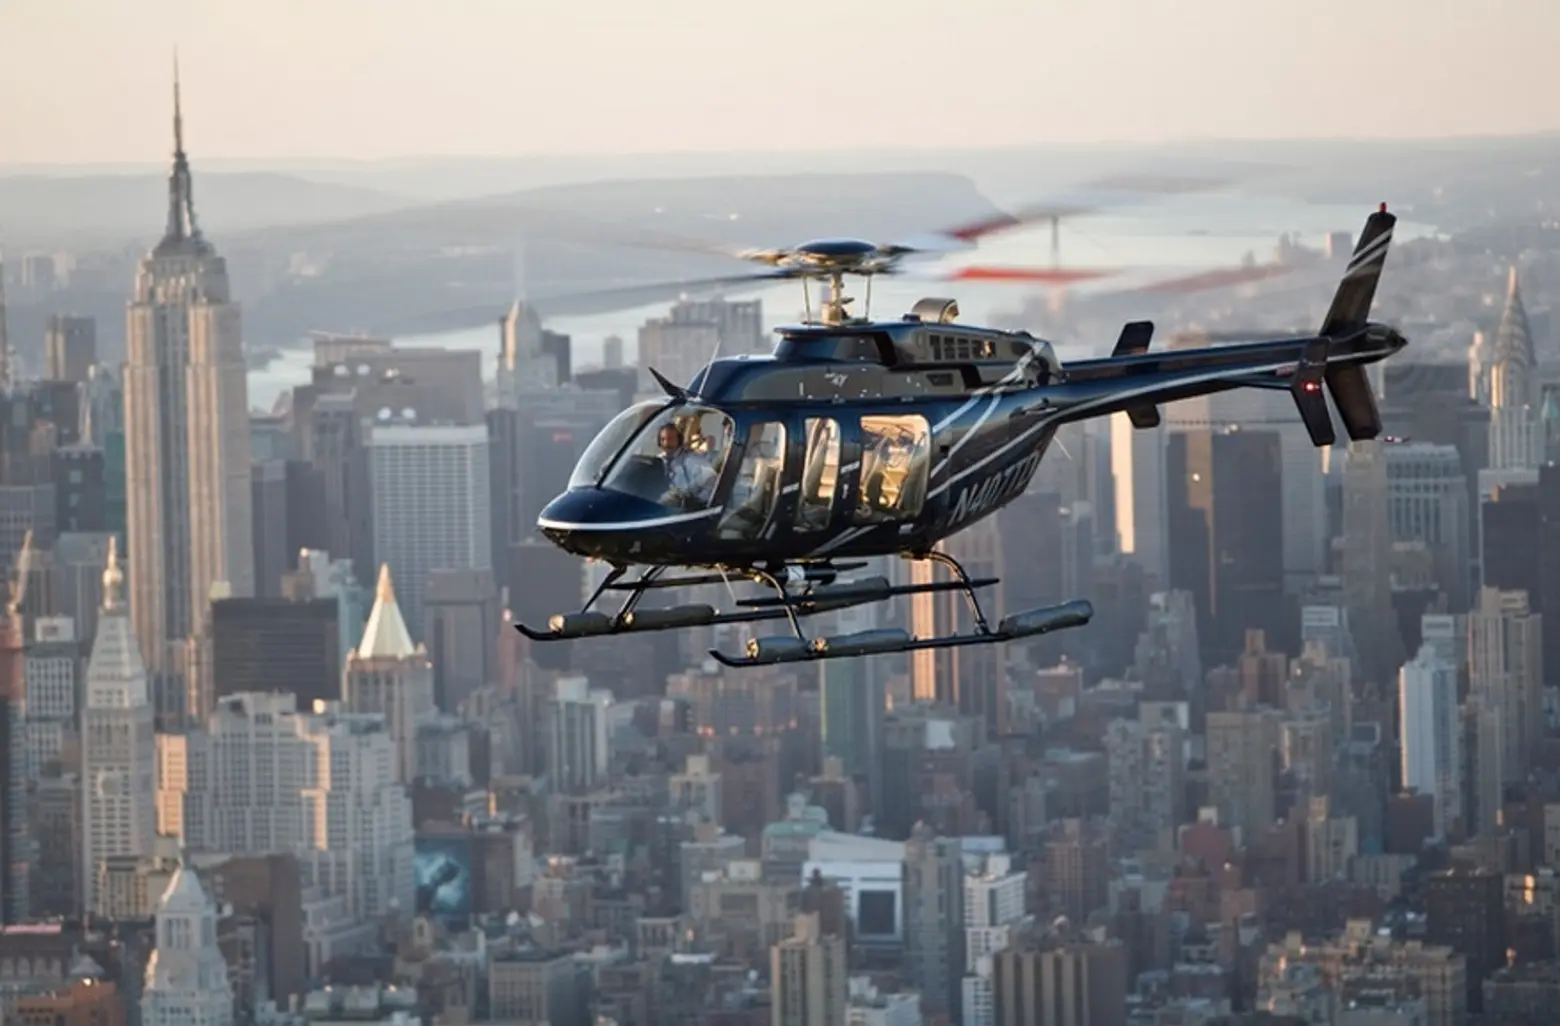 Gotham Air, helicopter taxi